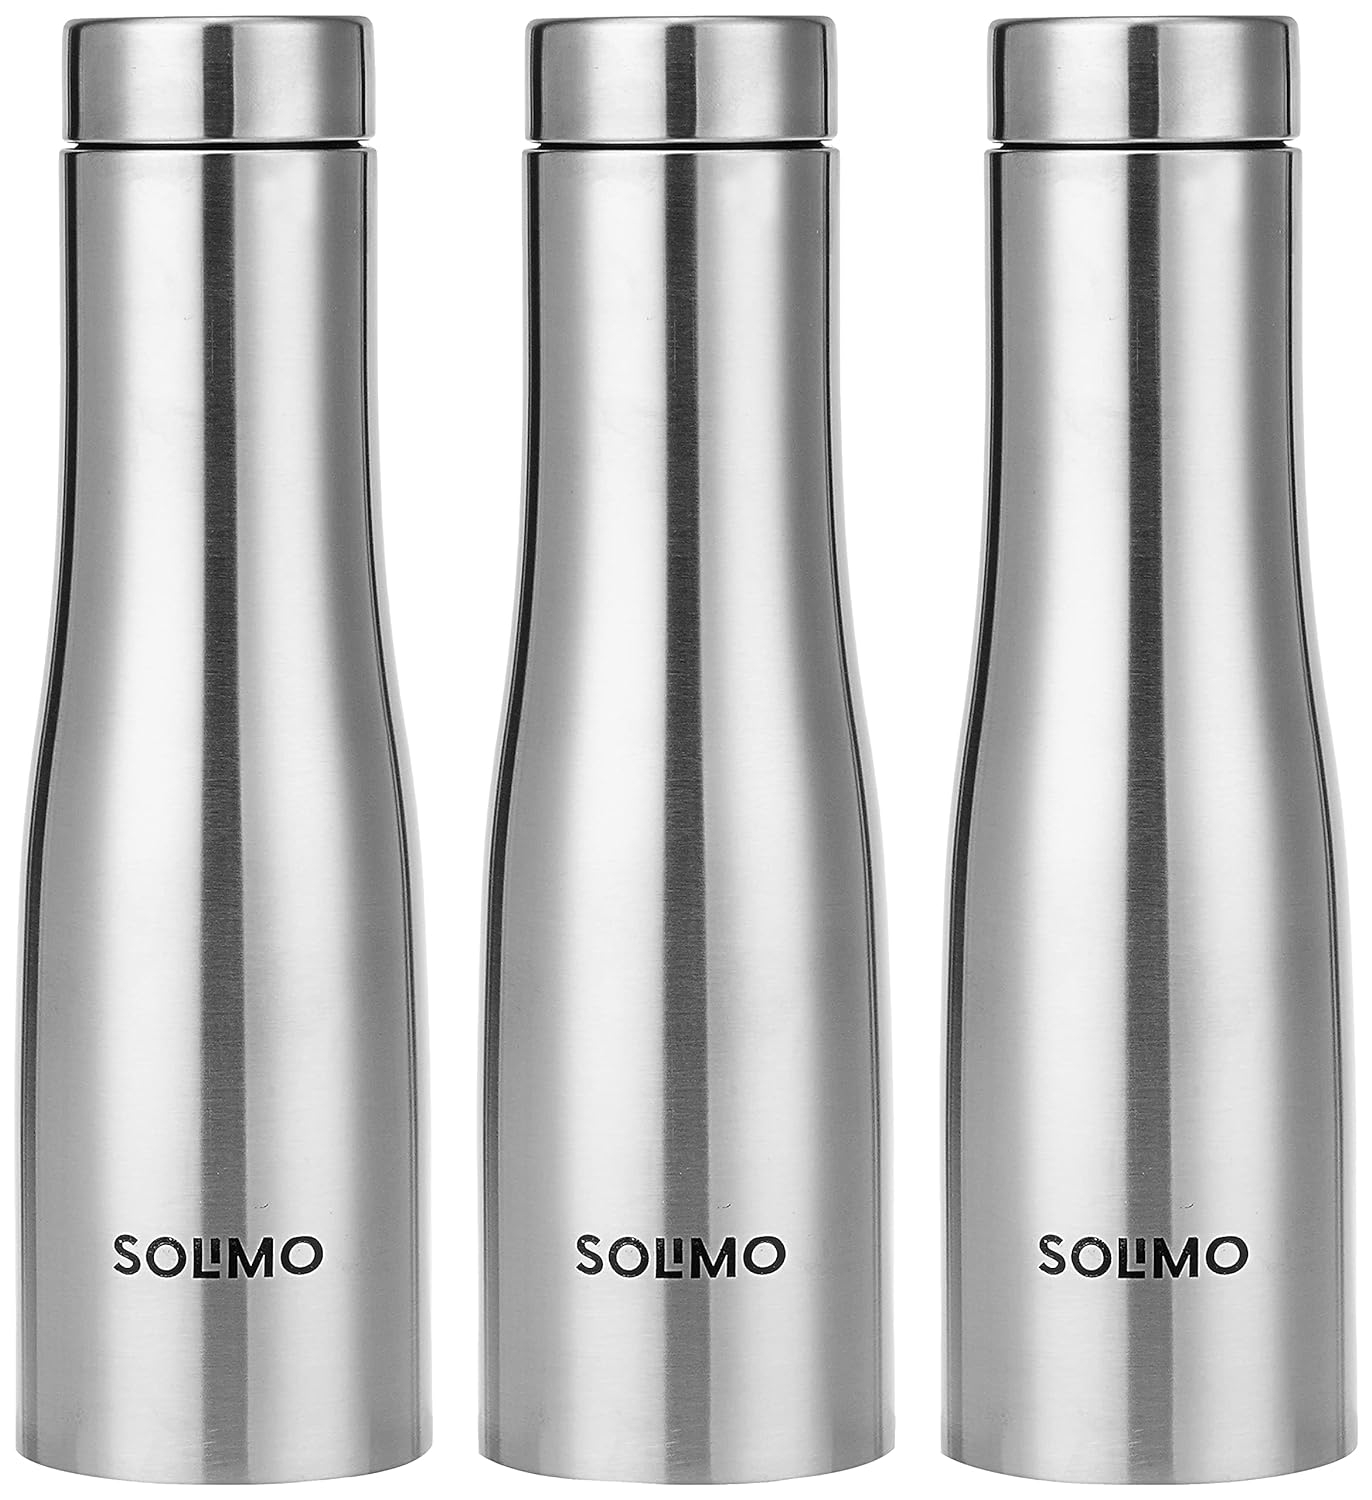 Solimo Curved Water Bottle Stainless Steel rust free body for school, office, travel bottle | 1 L Each | 3 pcs